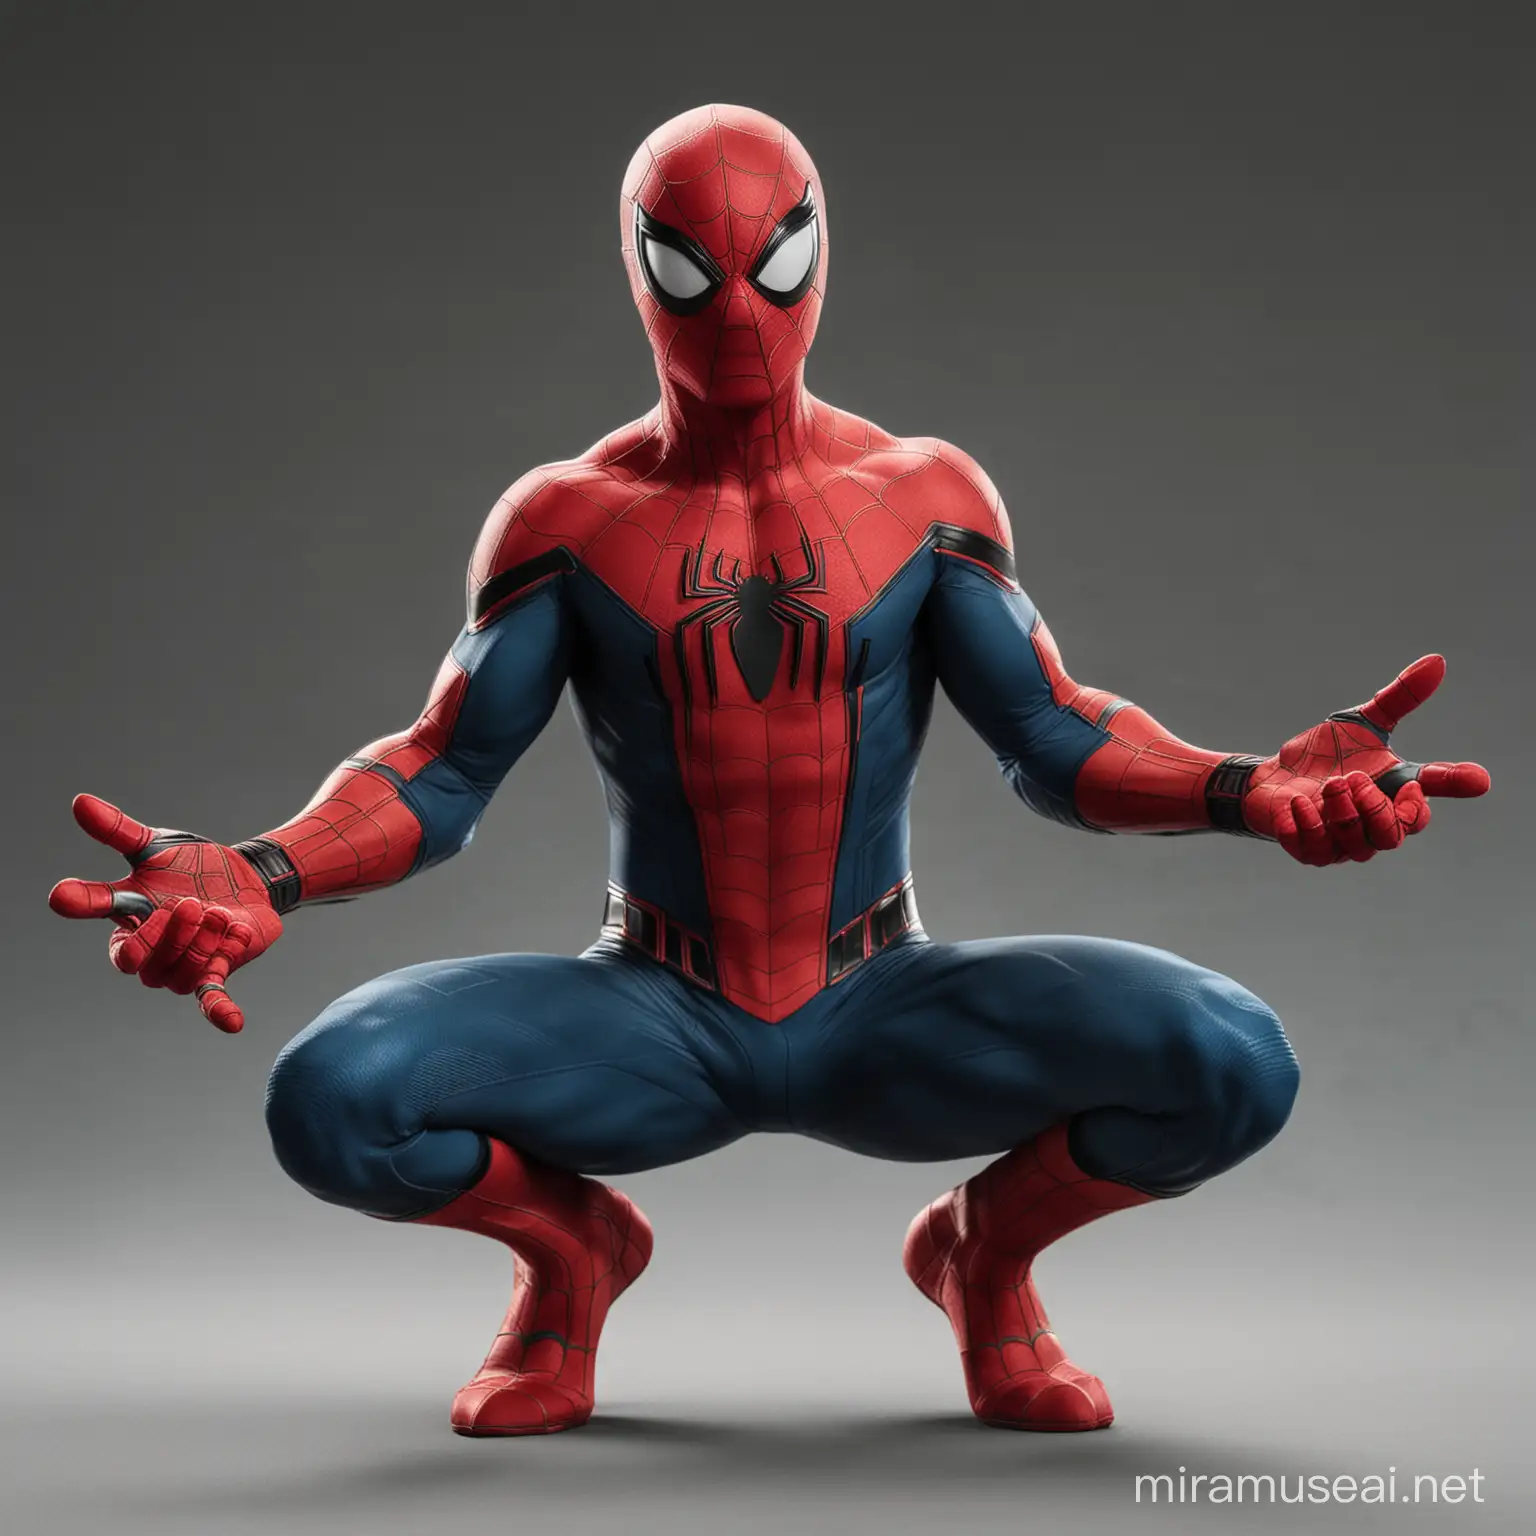 spiderman folding his arms